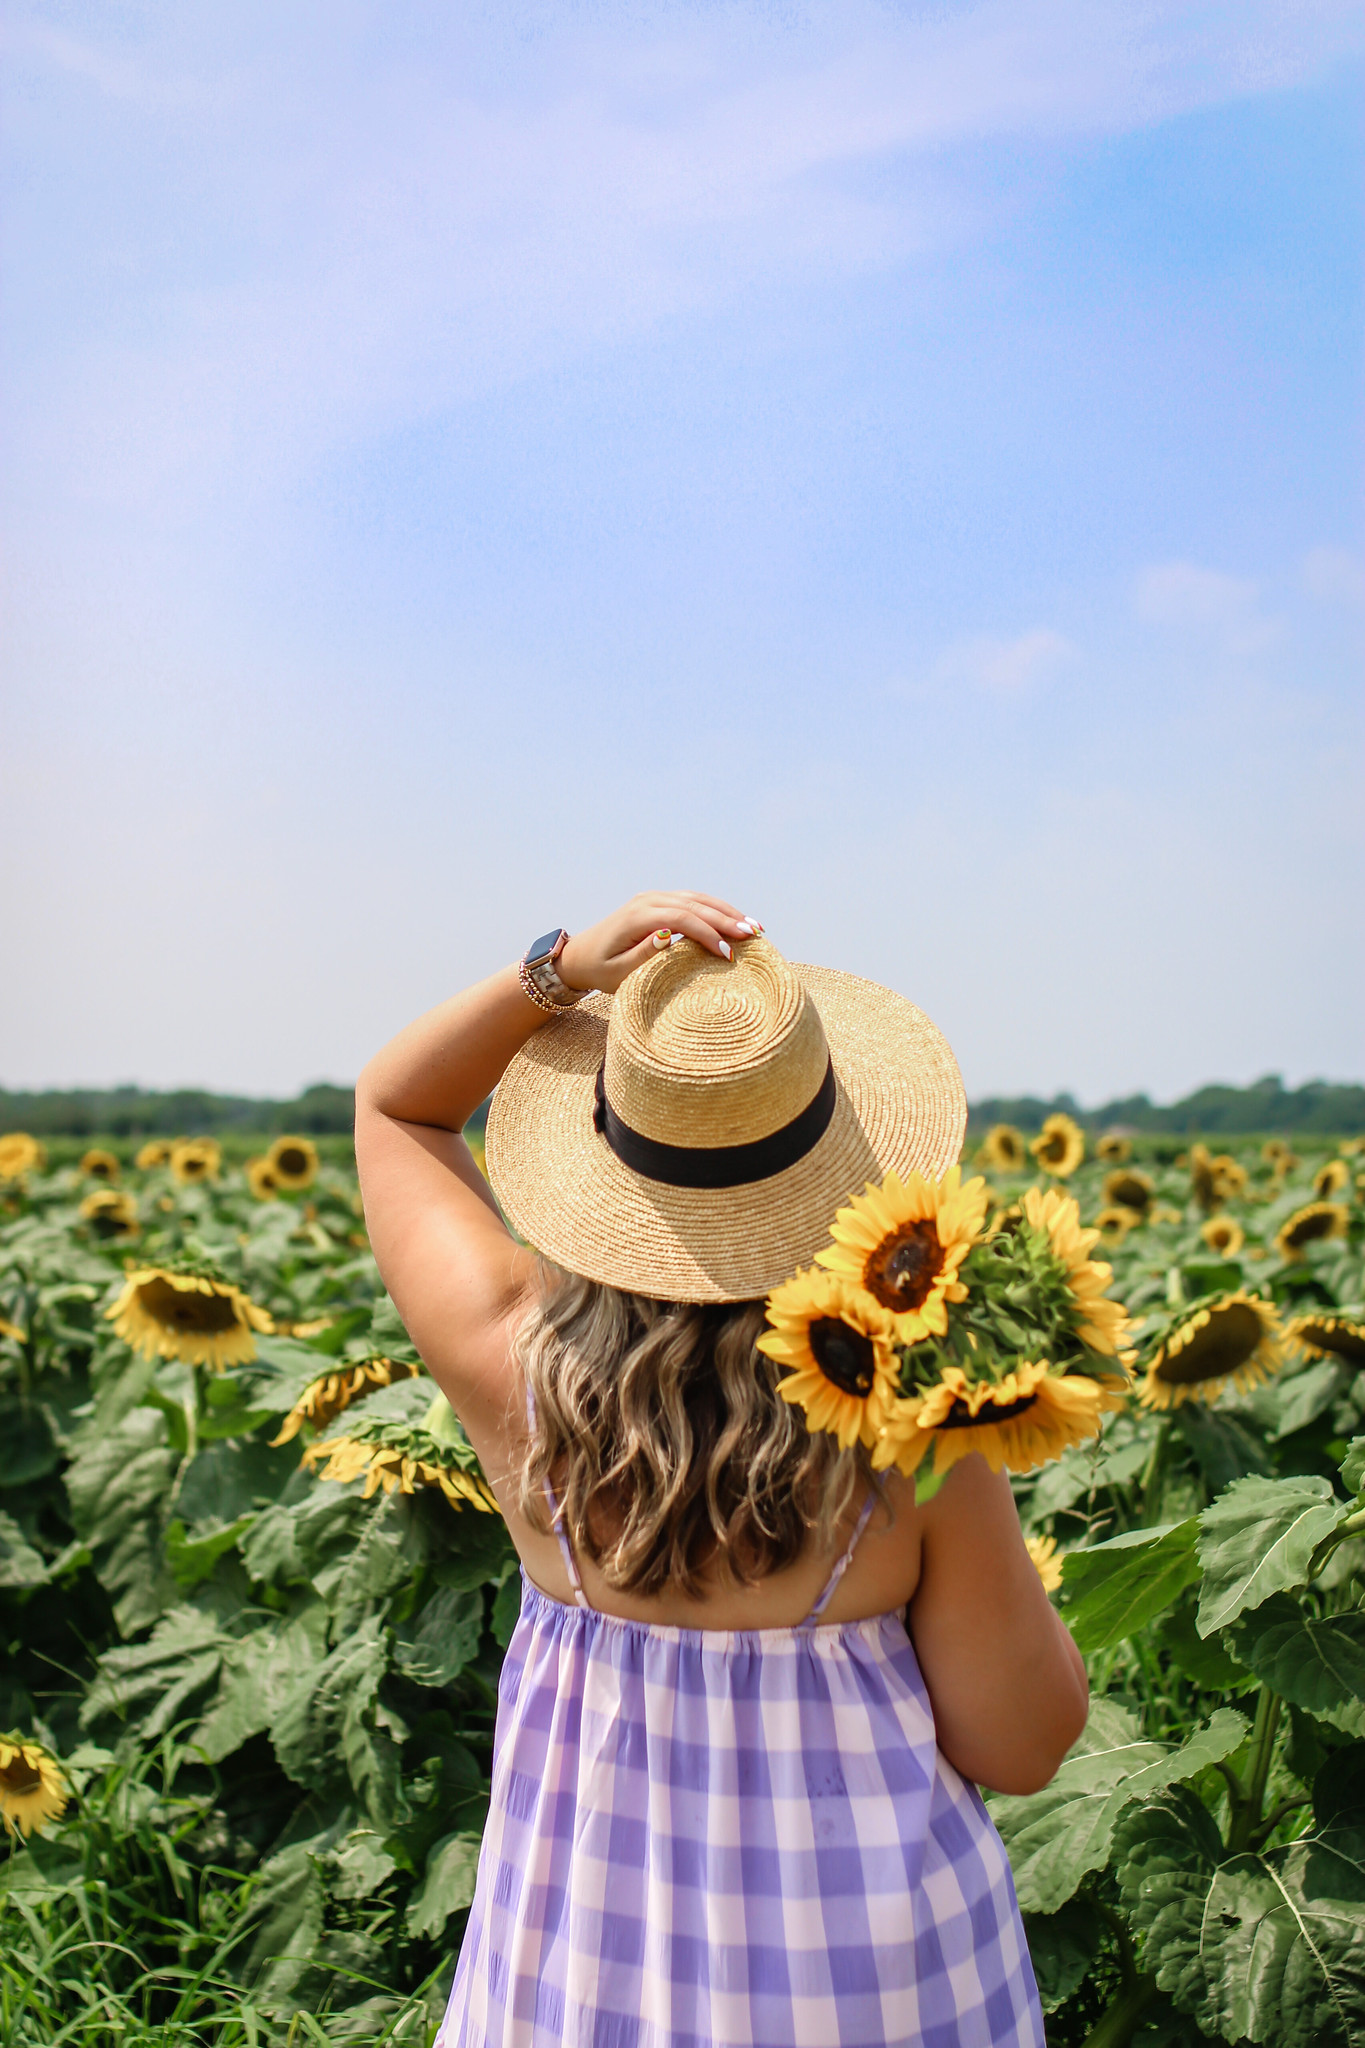 Why You Need to Visit a Sunflower Field this Year | Best Sunflower Fields to Visit in New York | Sunflower Fields in New York | Beautiful Sunflower Farms | Sunflower Farms Near NYC | Sunflower Field Aesthetic | Sunflower Landscape | Sunflower Field Poses | Sunflower Field Photoshoot Inspiration | Sunflower Aesthetic | Sunflower Season